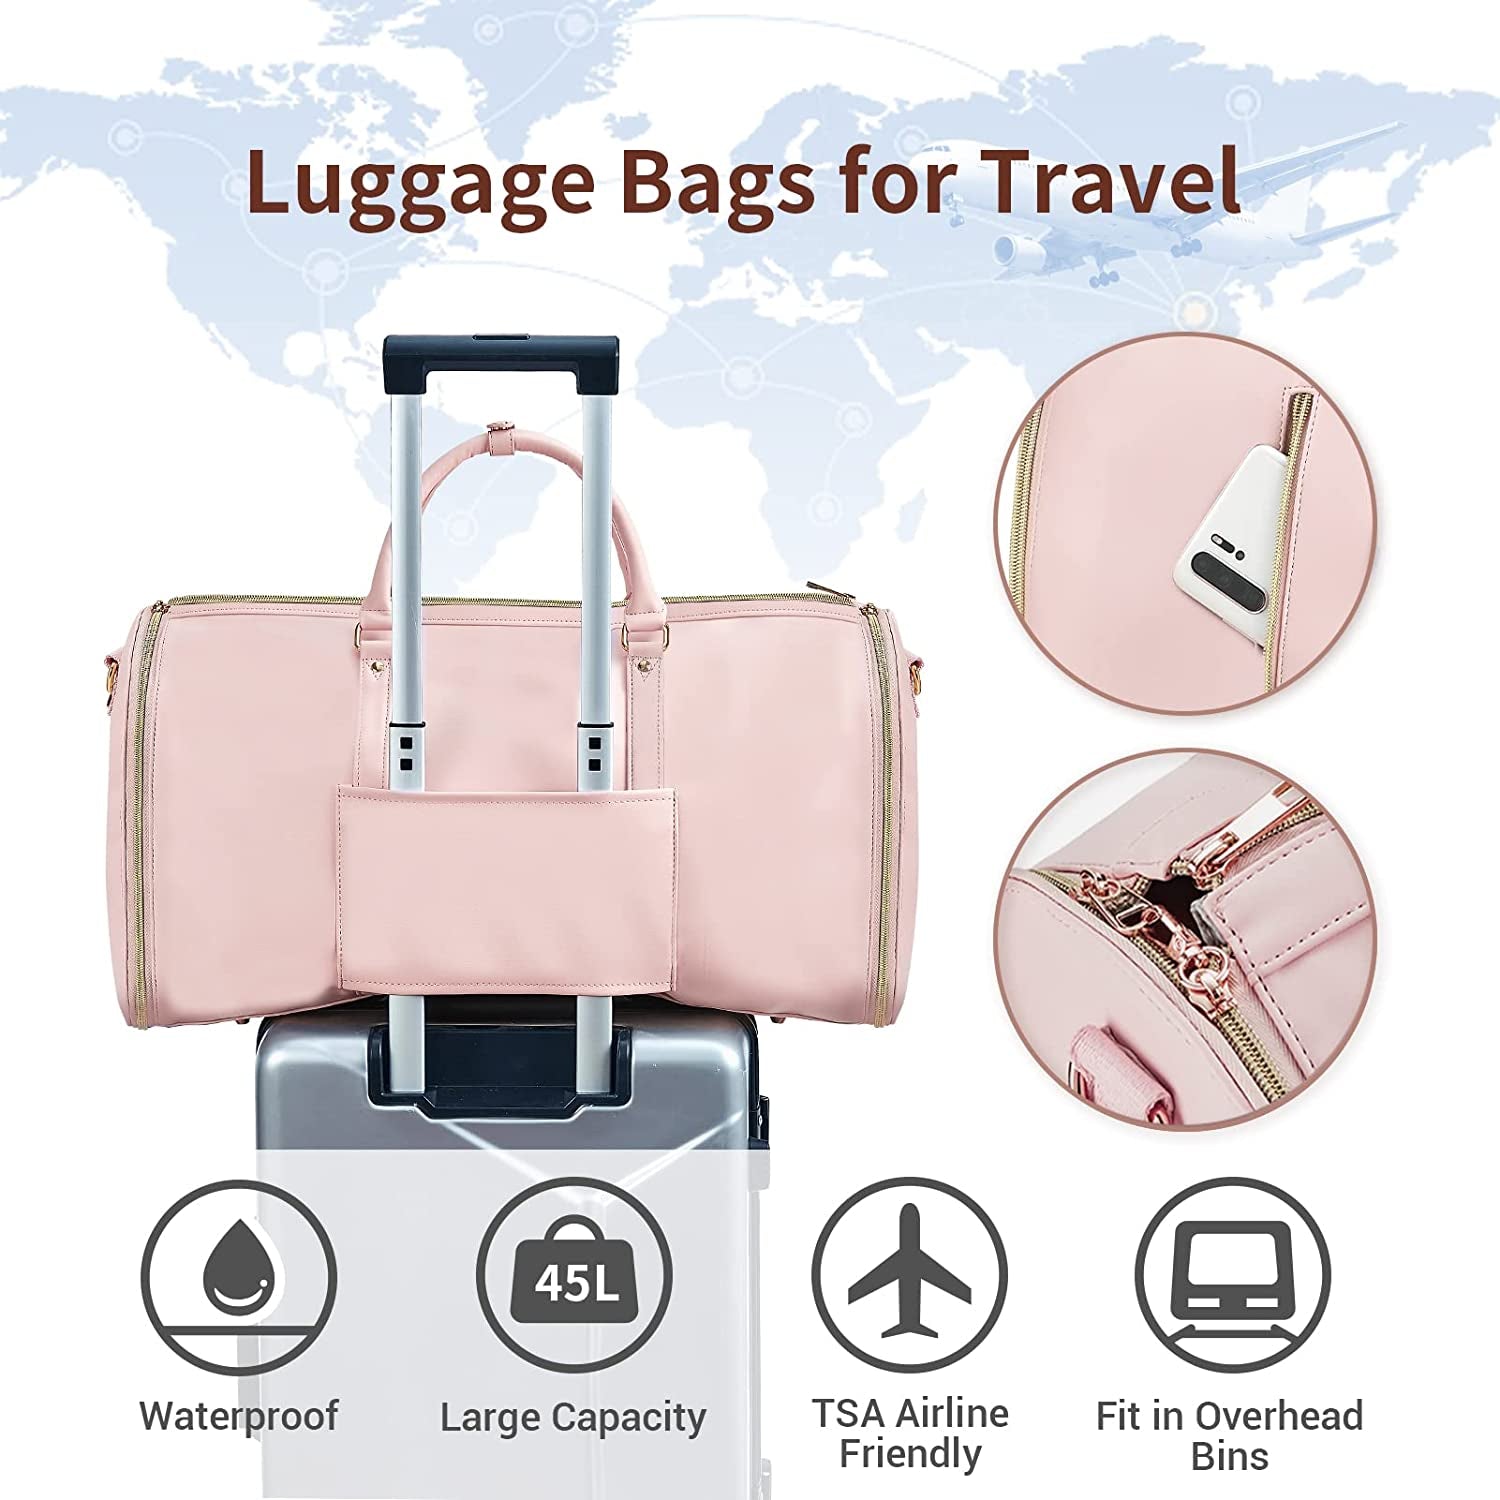 Garment Bags for Travel, Convertible Suit Travel Bag for Women, Stylish Carry on Garment Bag with Toiletry Pocket, Shoulder Strap and Shoes Compartment, 2 in 1 Foldable PU Leather Duffle Bag, Pink